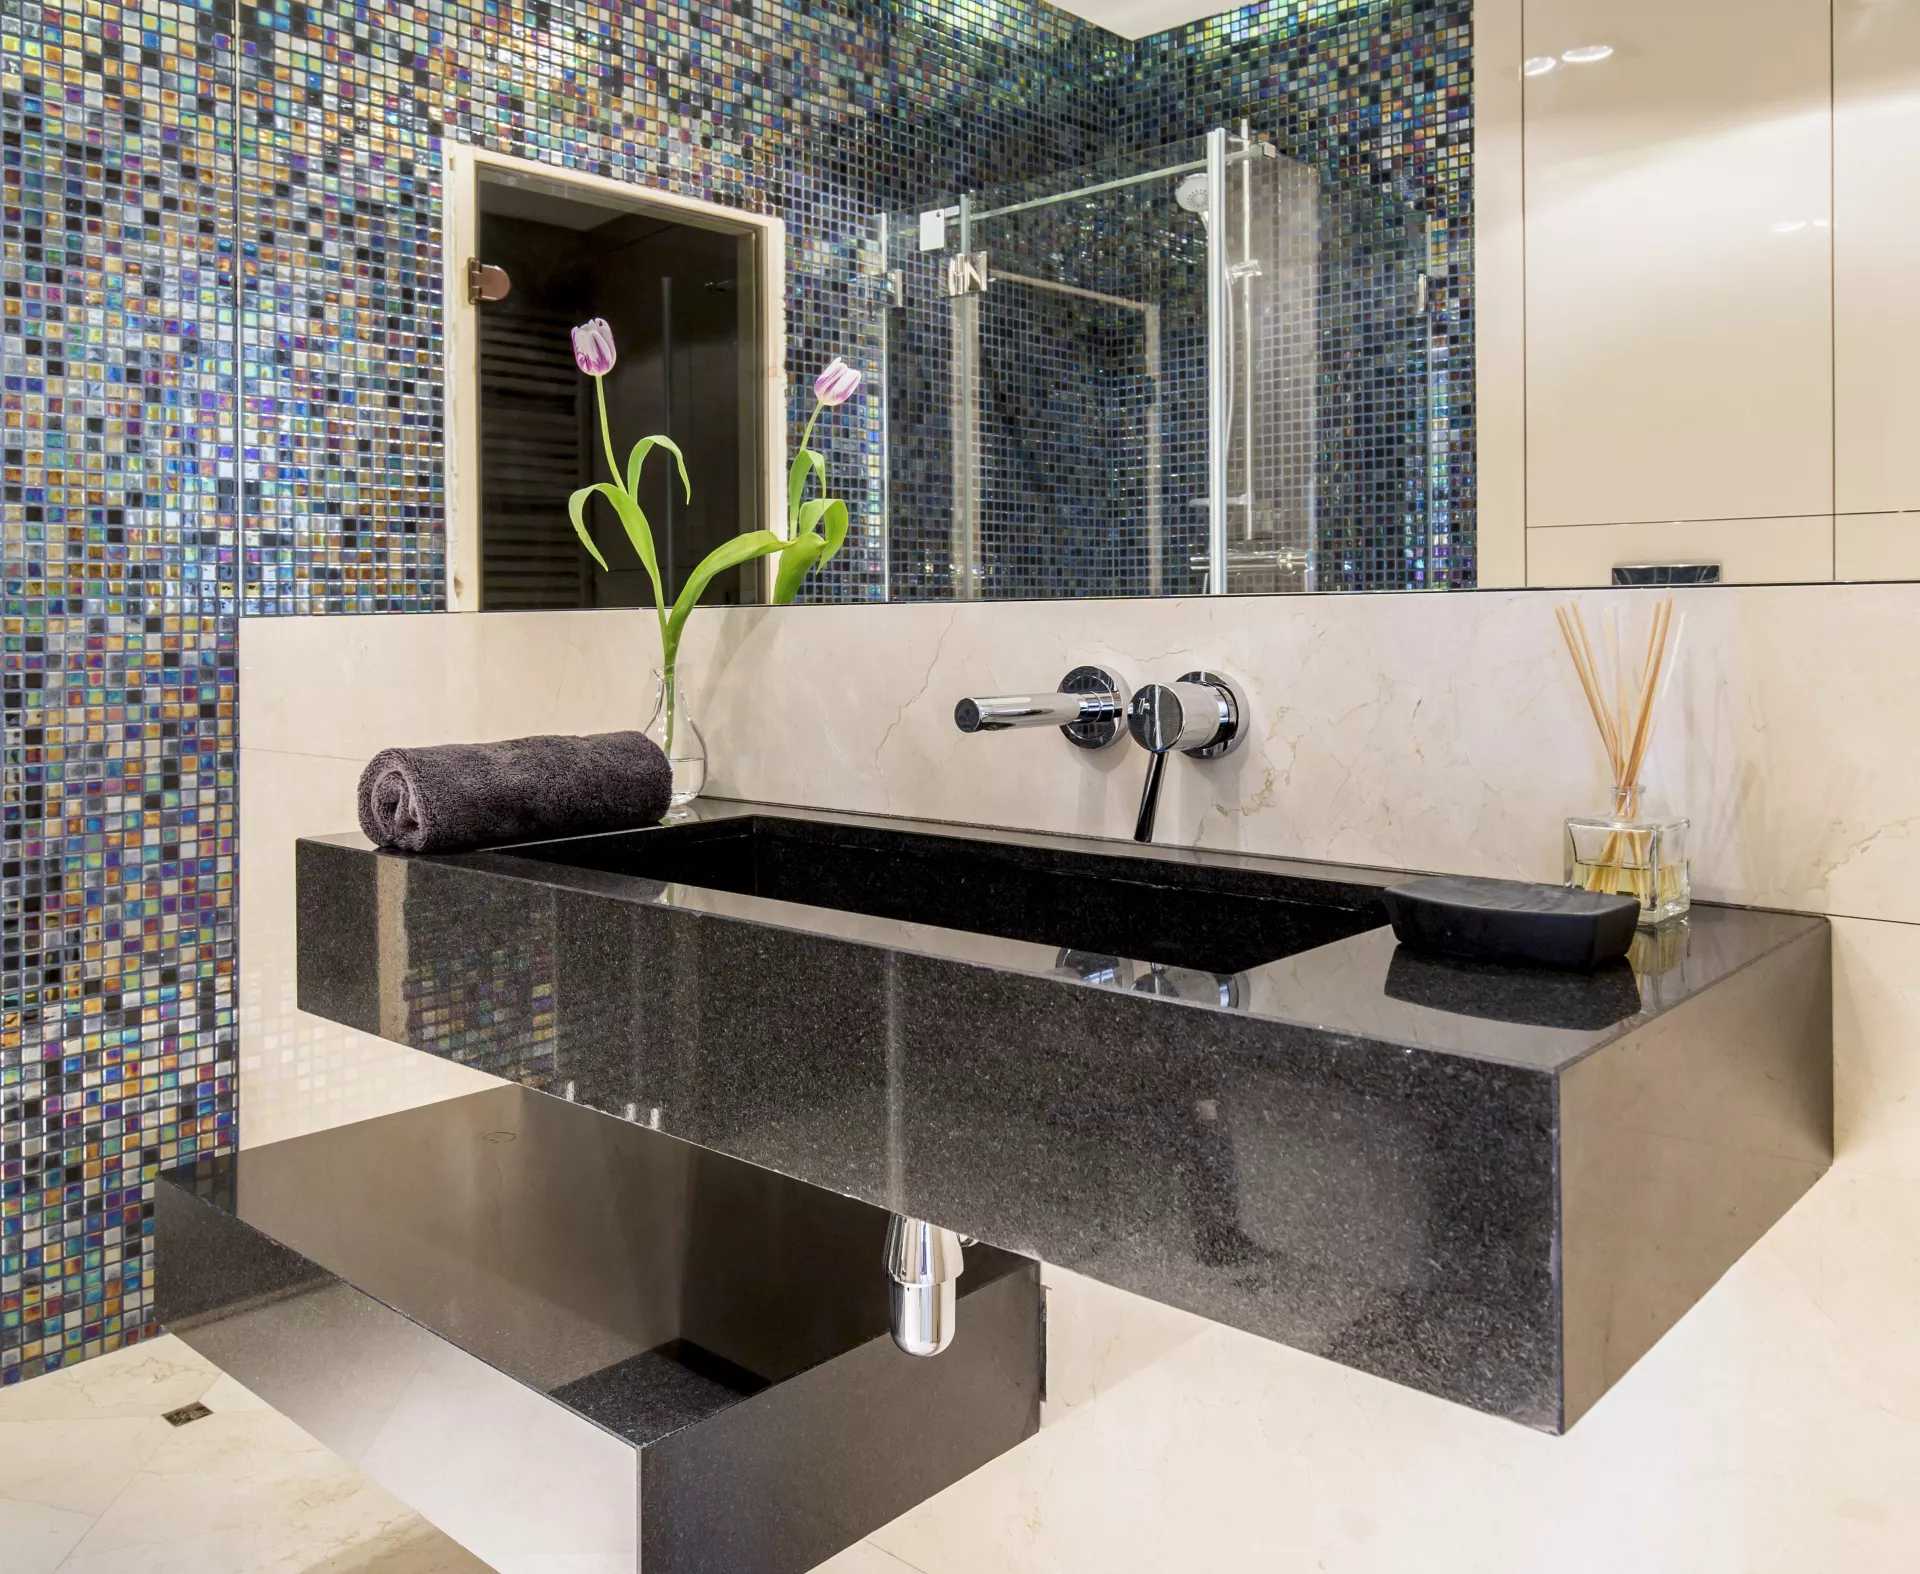 Bathroom decorated with mosaic